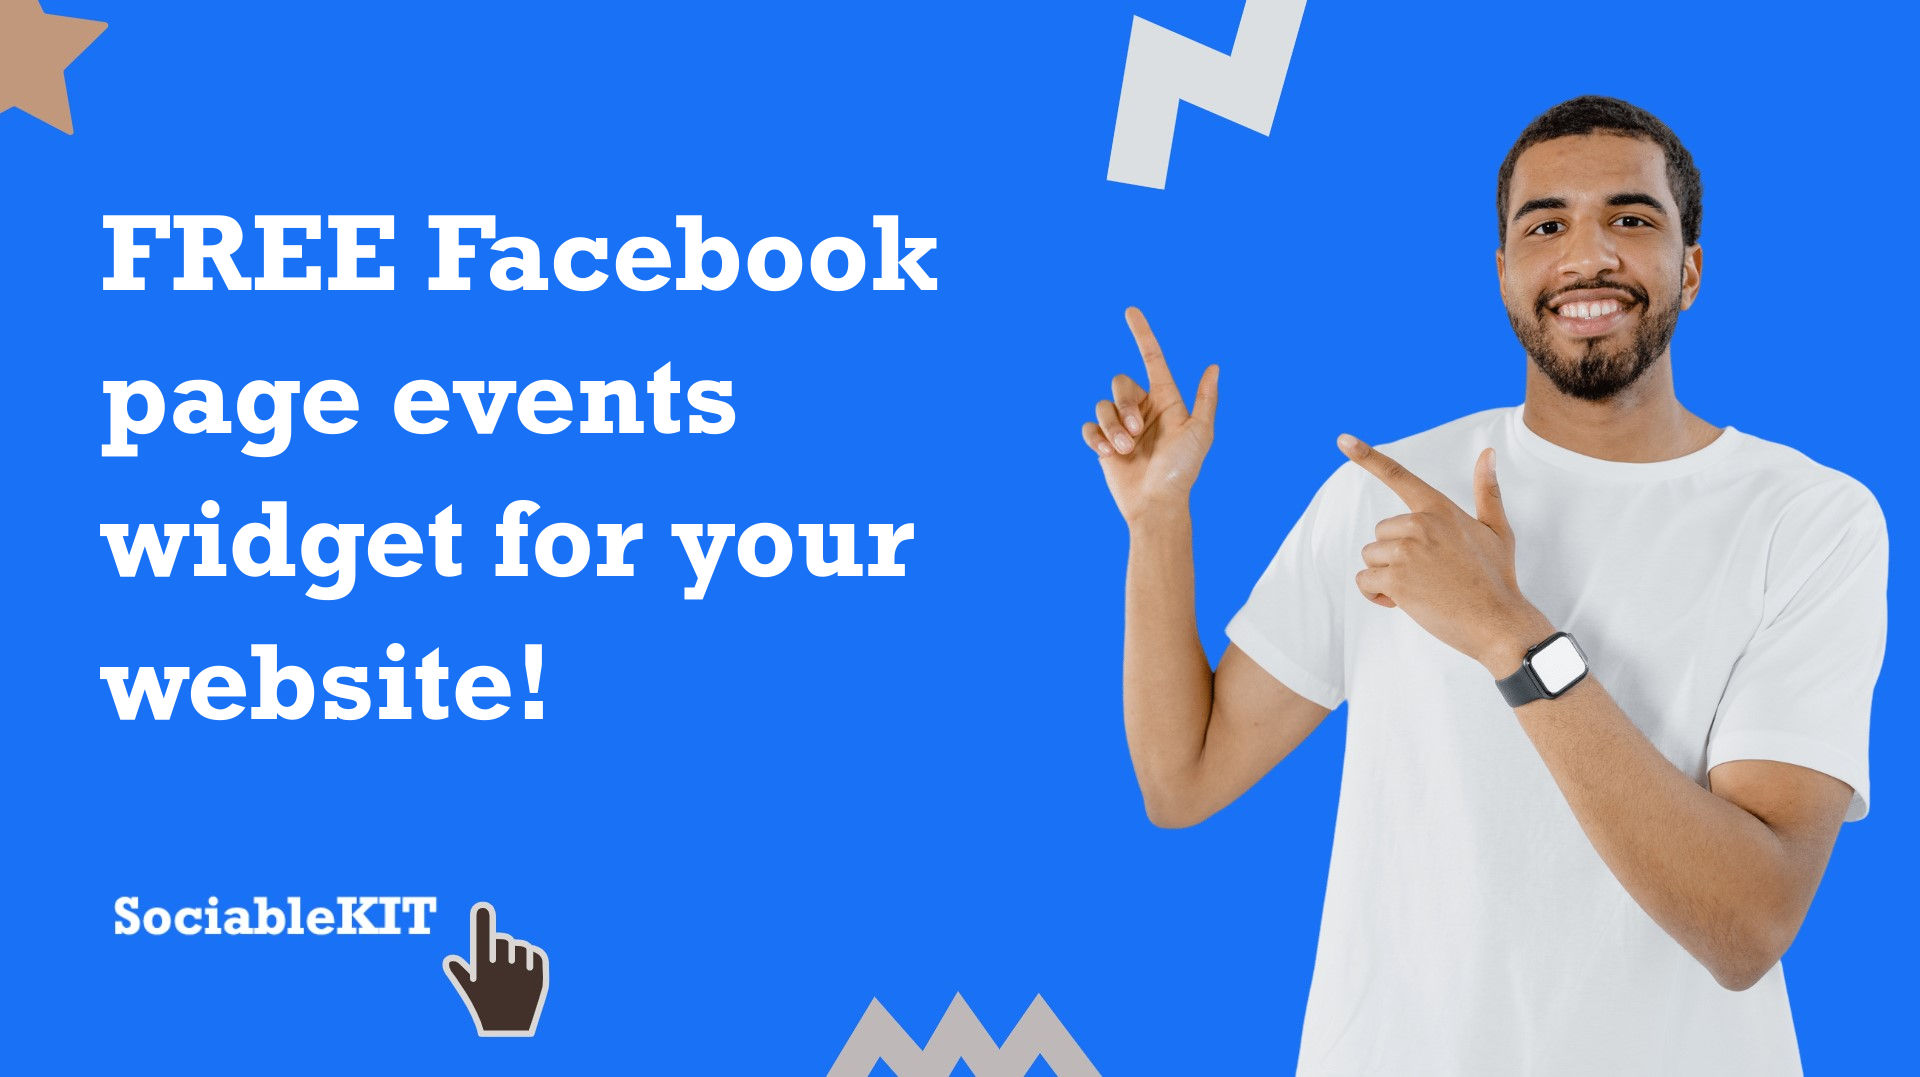 Free Facebook page events widget for your website